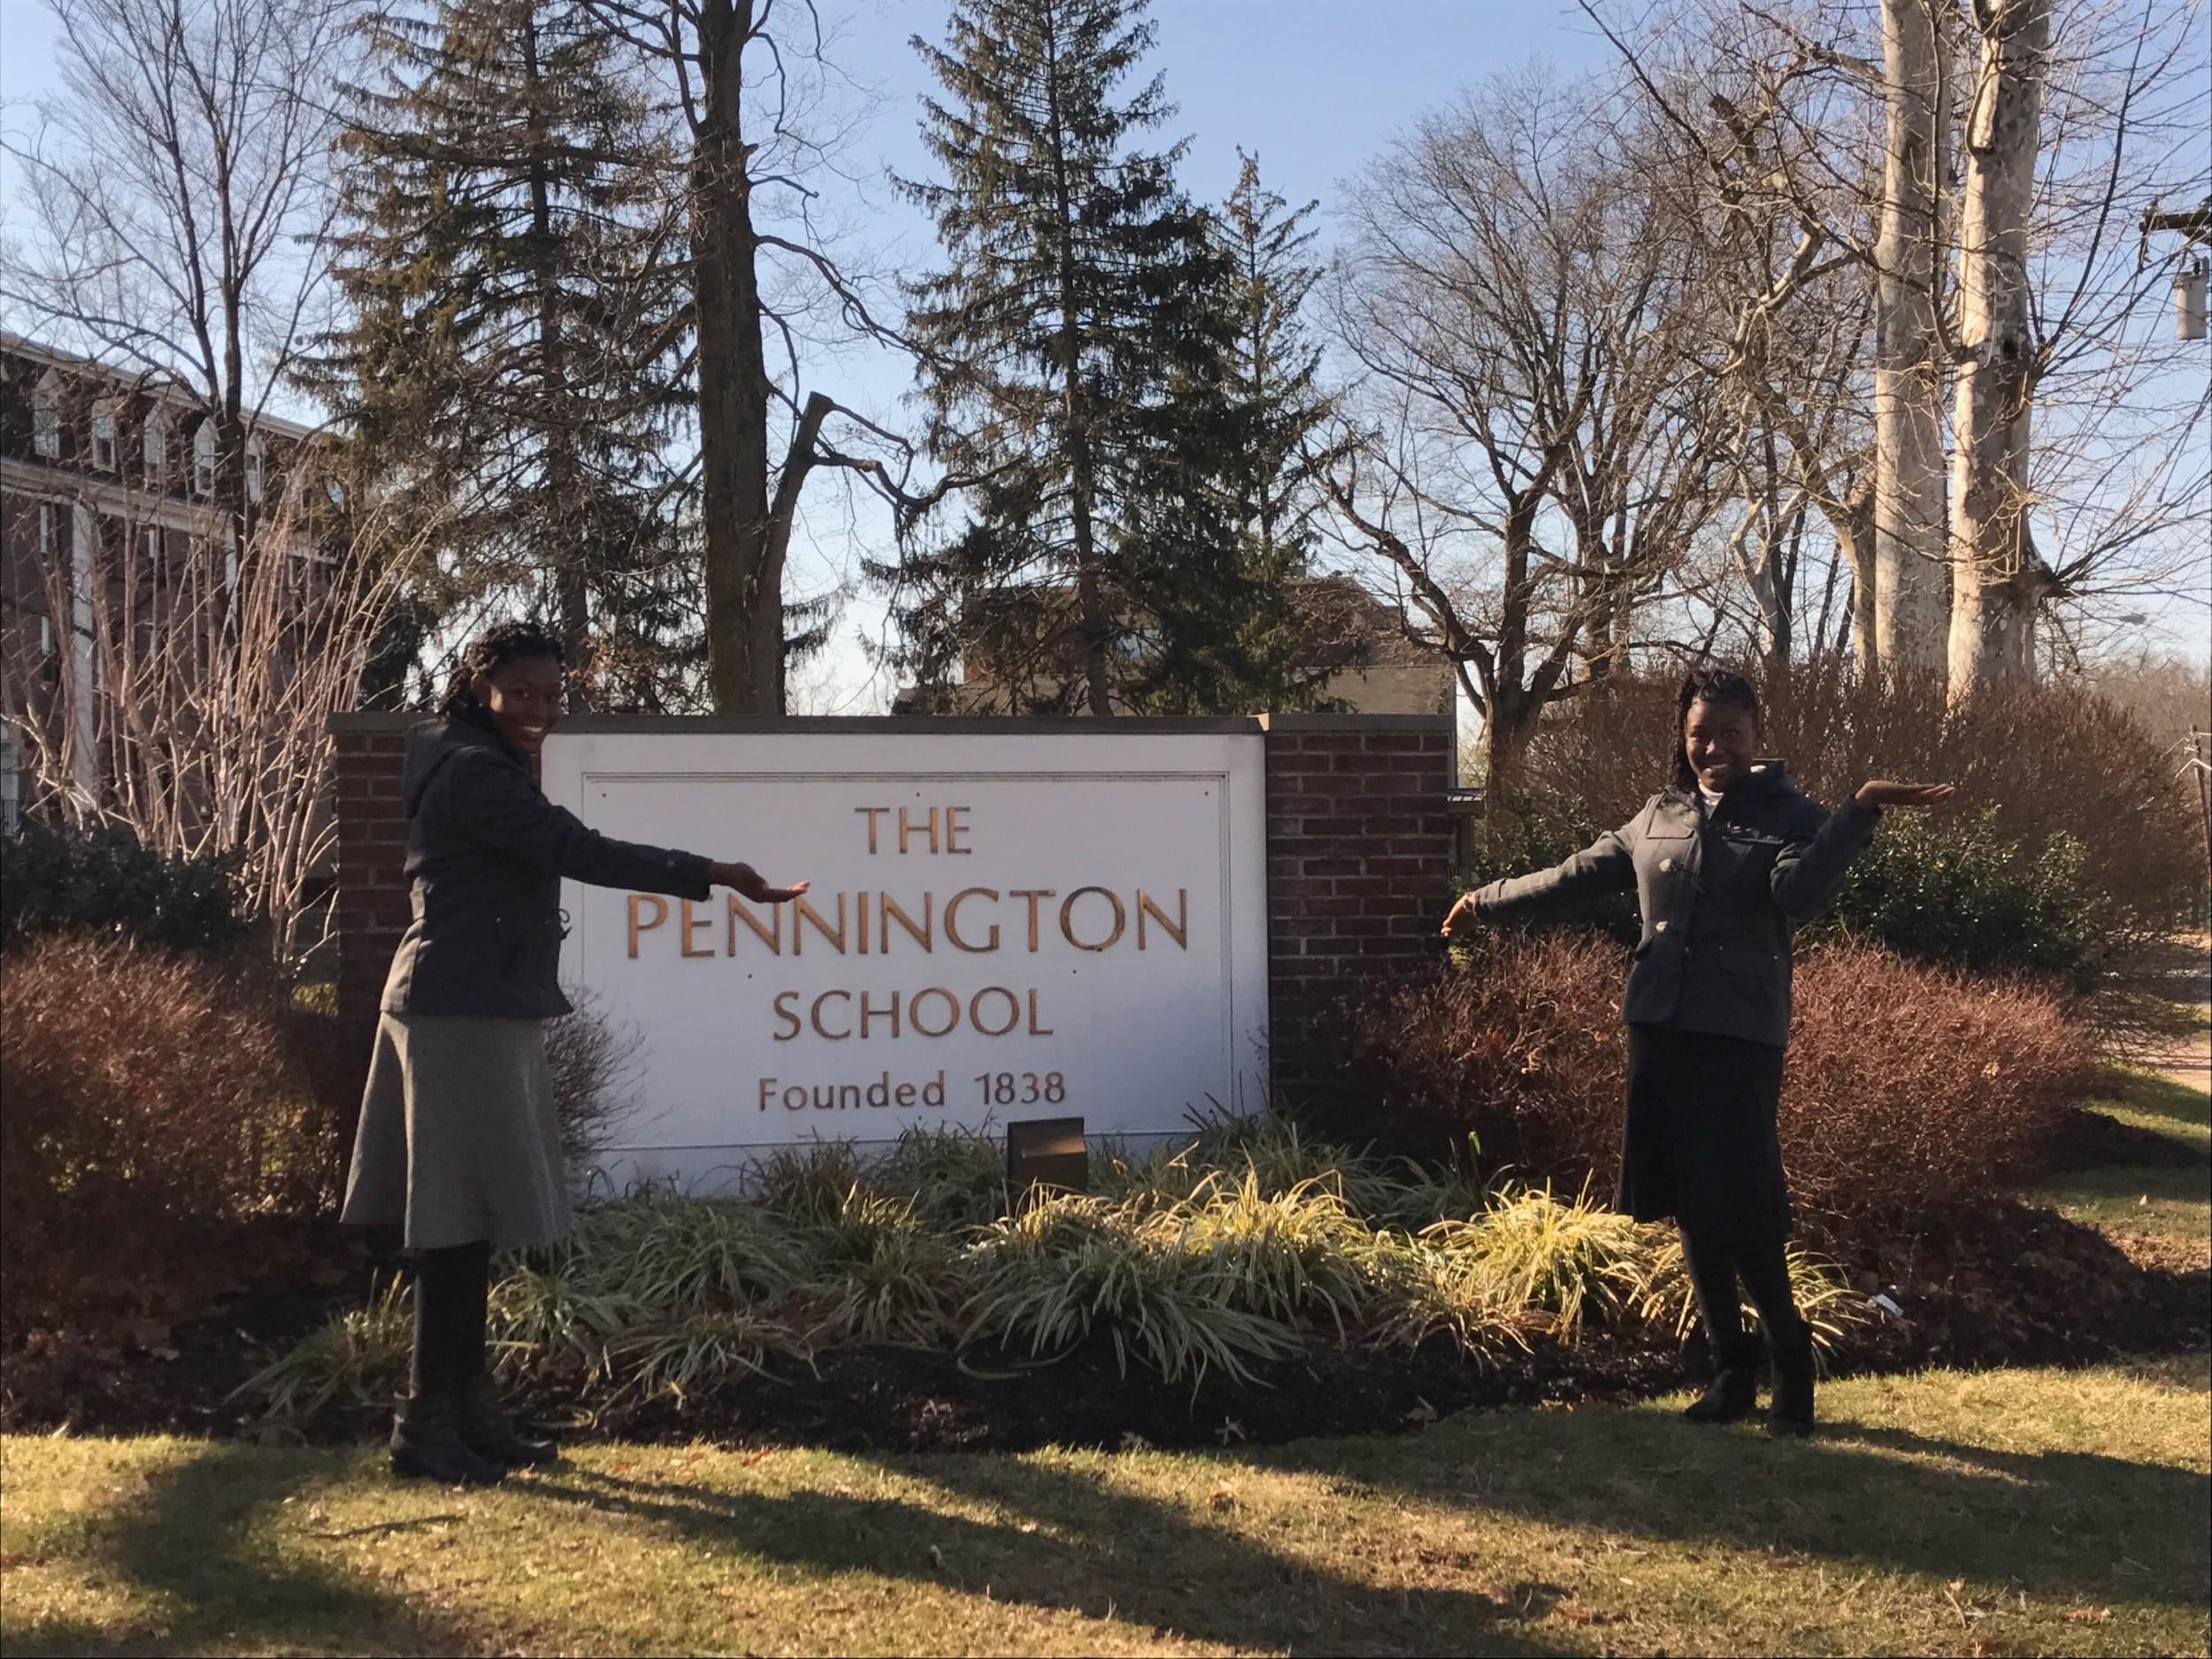 Tiia McKinney will be attending The Pennington School this fall. She toured the campus this January and absolutely loved the school, the community, the students, and the teachers! She felt so welcomed and had a wonderful reception by all. Tiia feels…